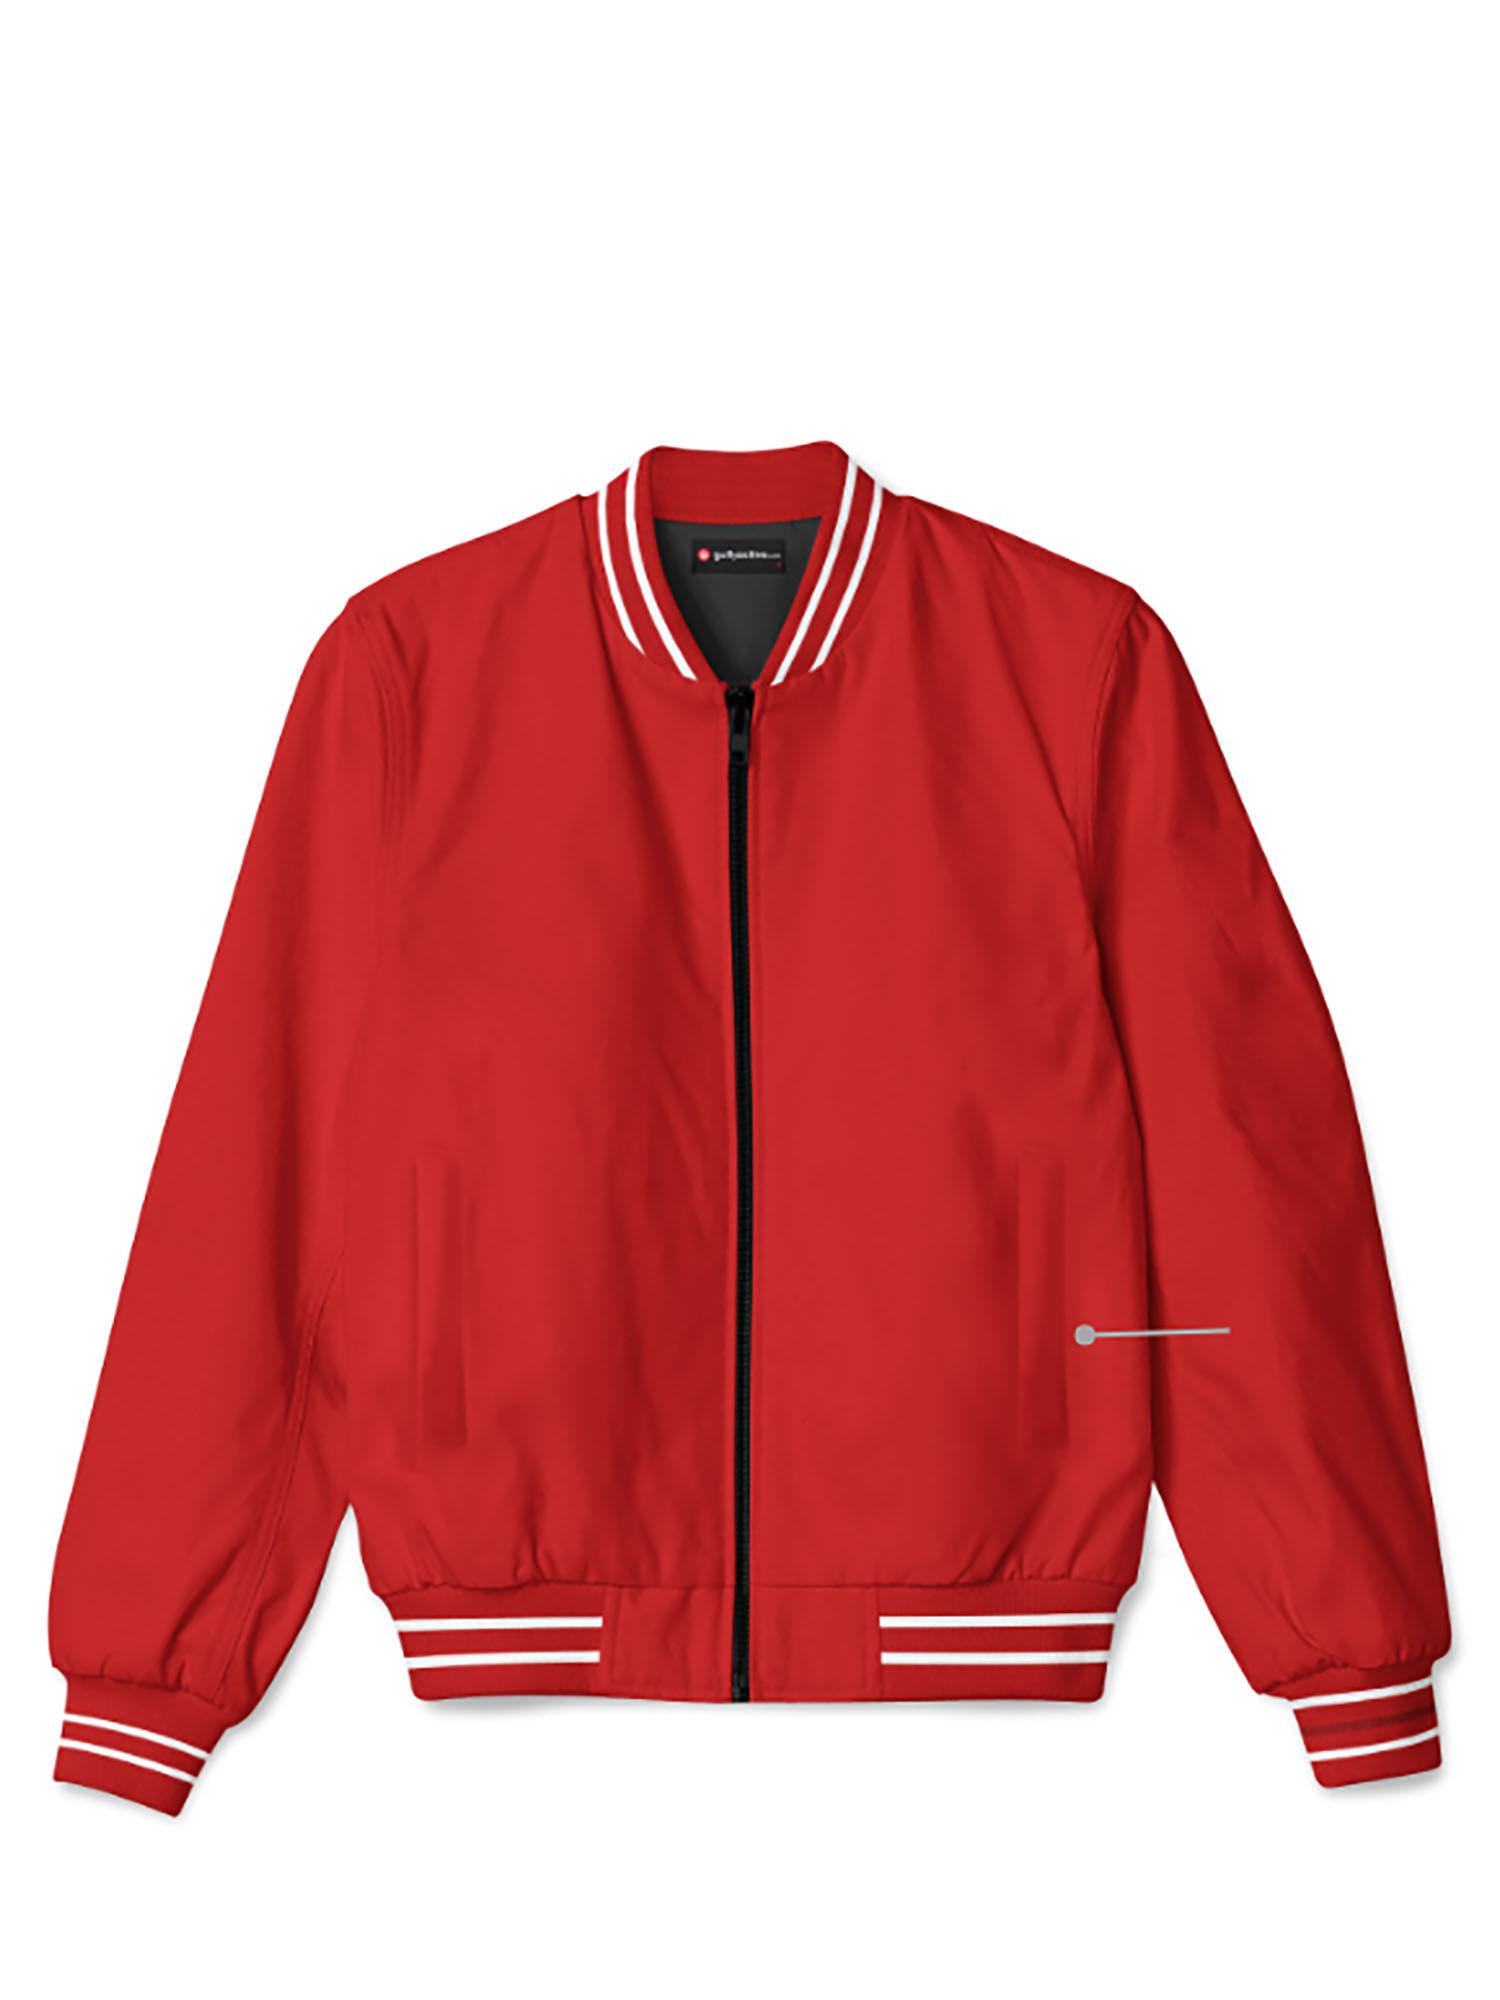 classic all season bomber jacket for men midnight scarlet red